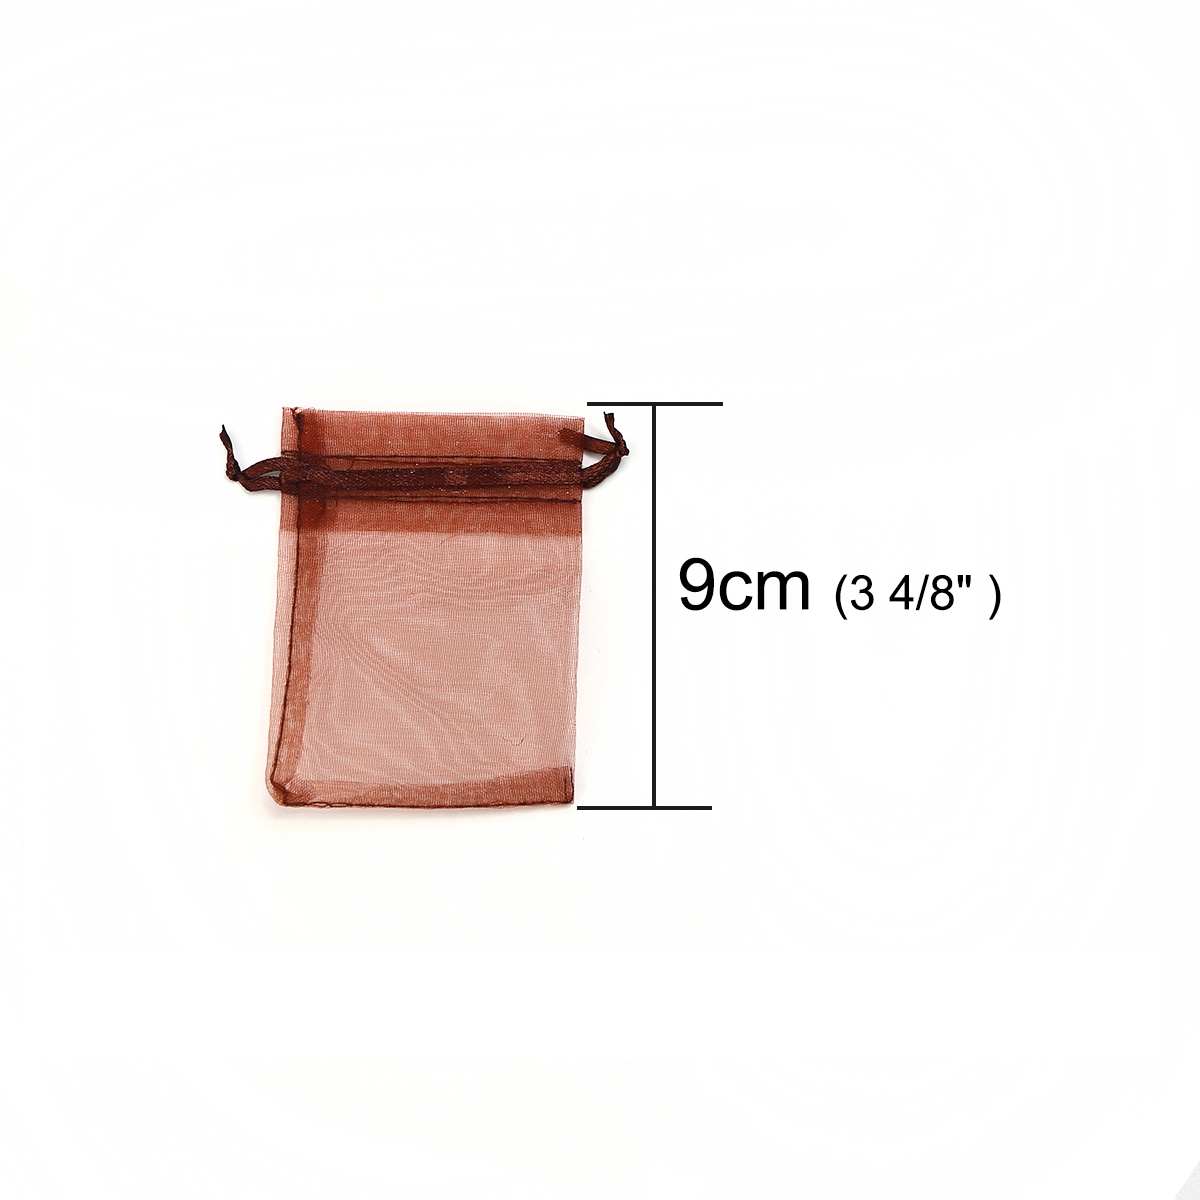 Picture of Wedding Gift Organza Jewelry Bags Drawstring Rectangle Brown (Usable Space: 7x7cm) 9cm(3 4/8") x 7cm(2 6/8"), 50 PCs